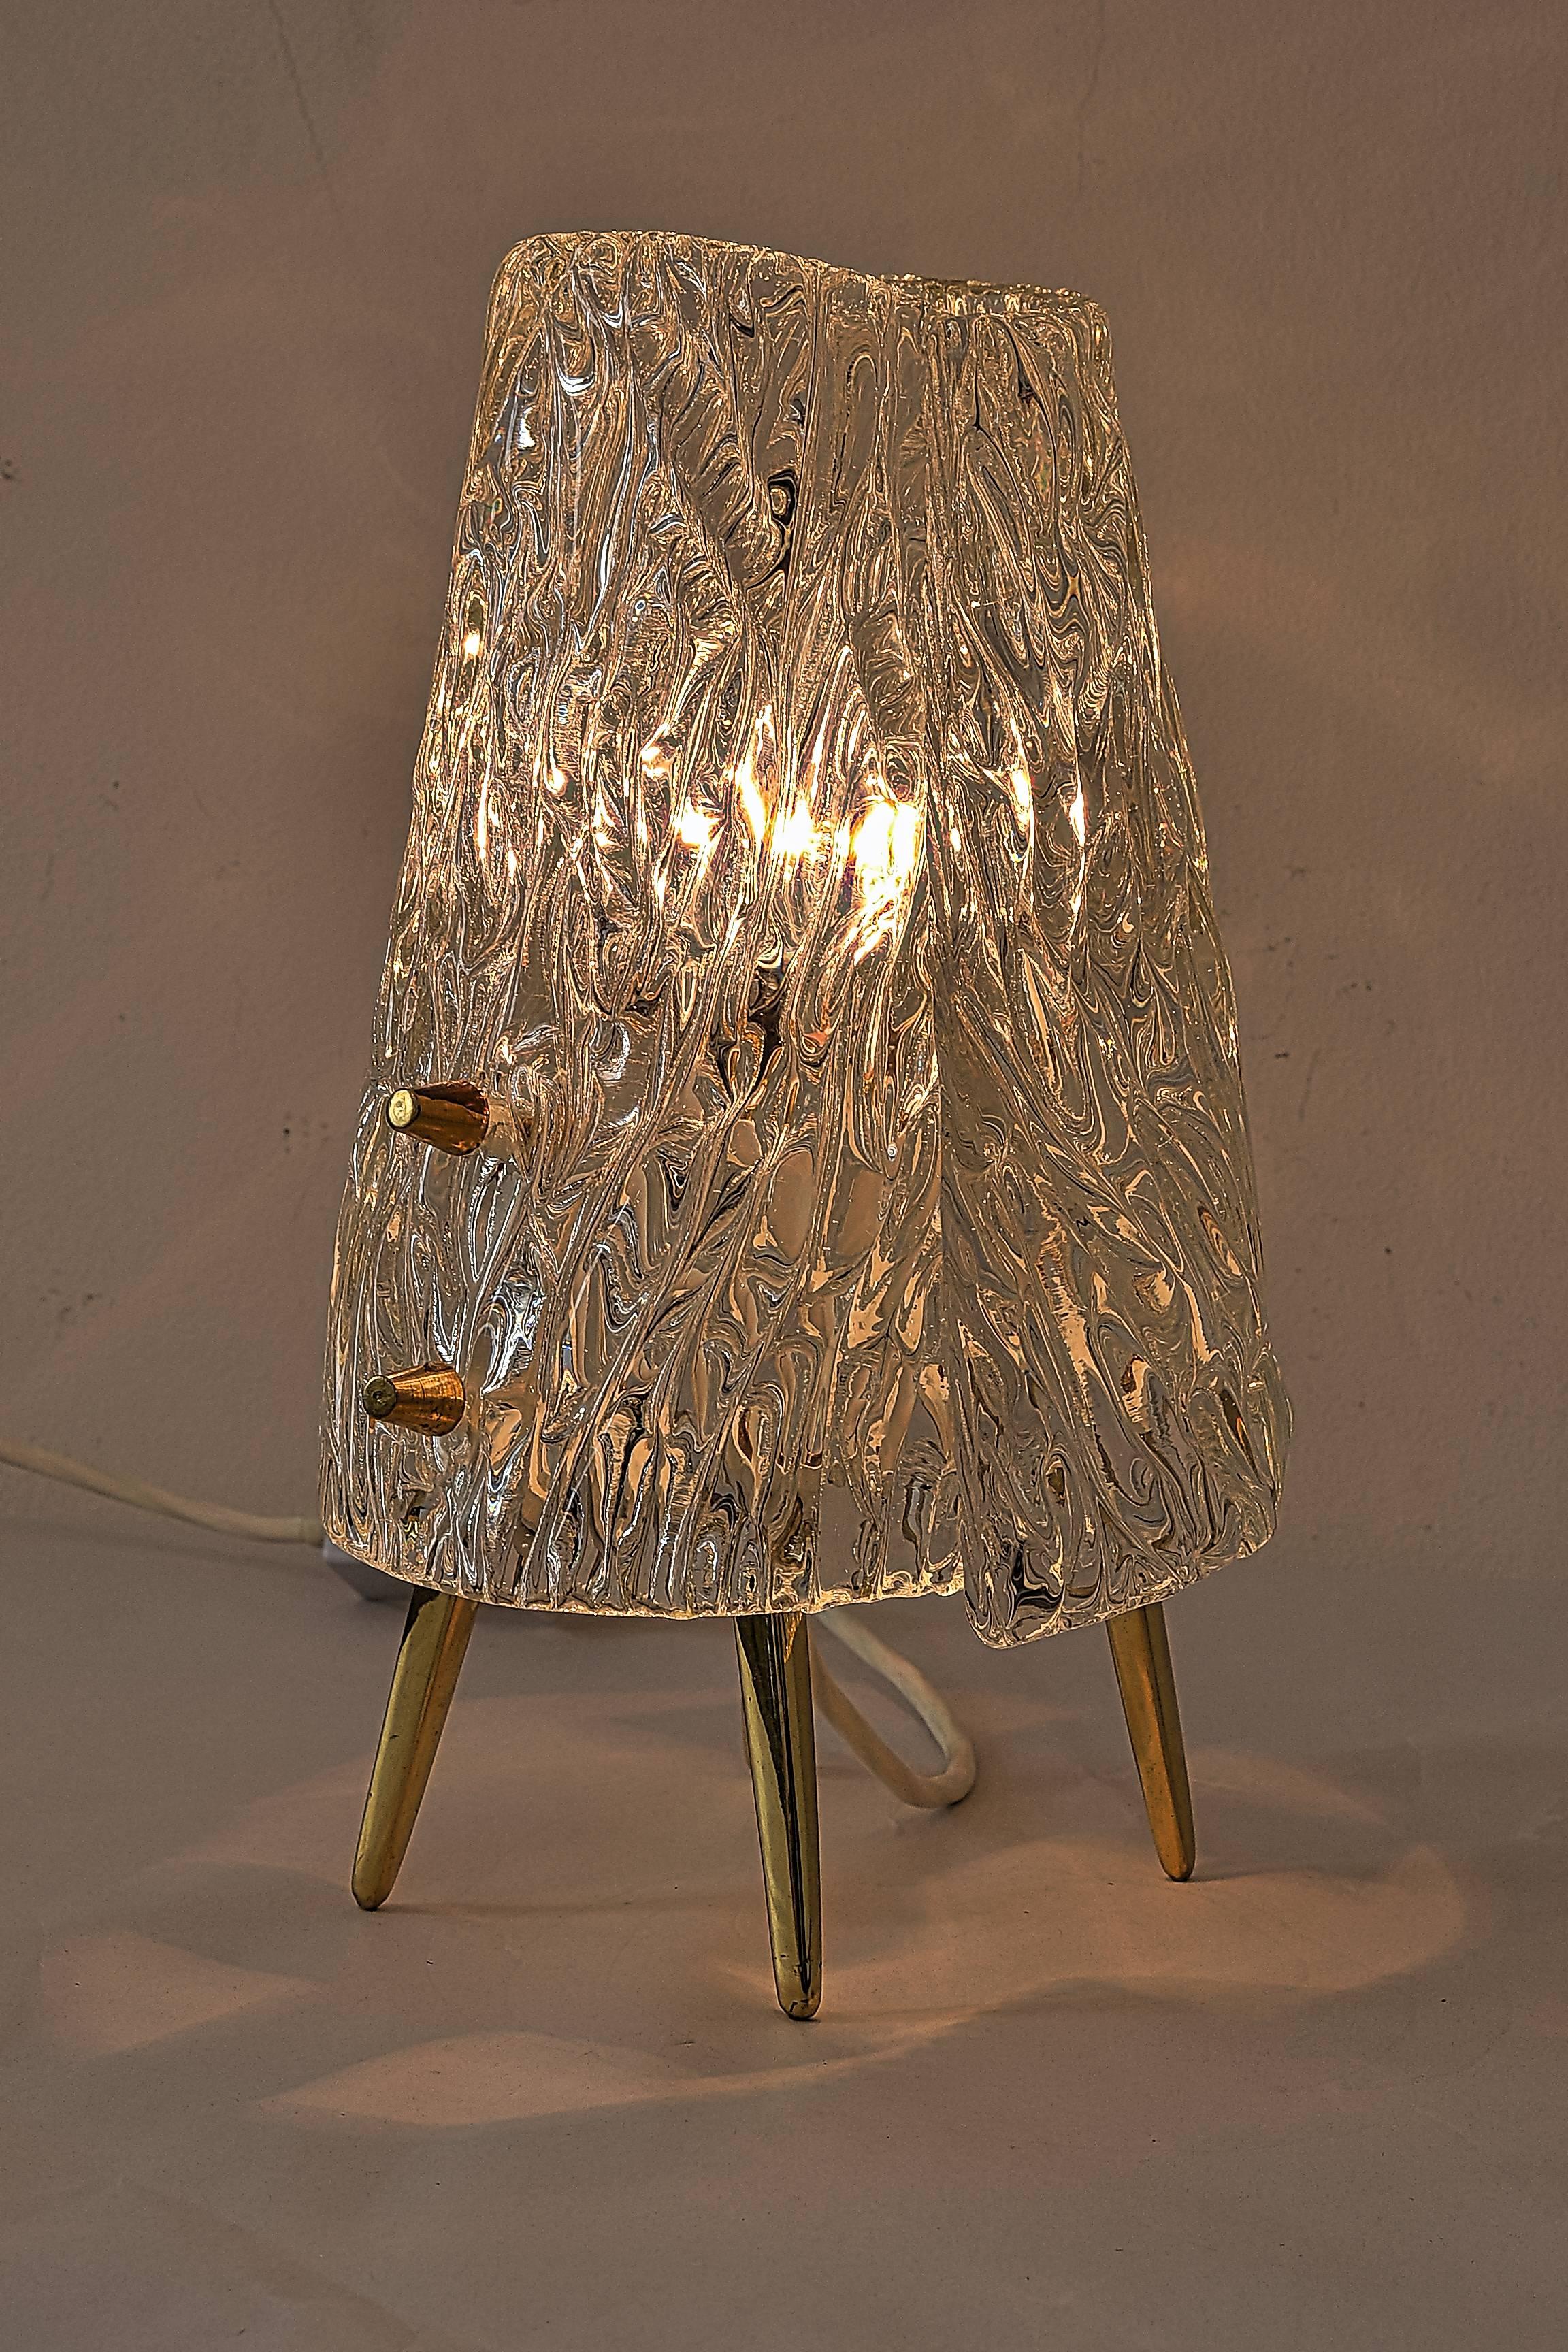 Viennese Kalmar brass and glass table lamps, 1950s.
Original condition.